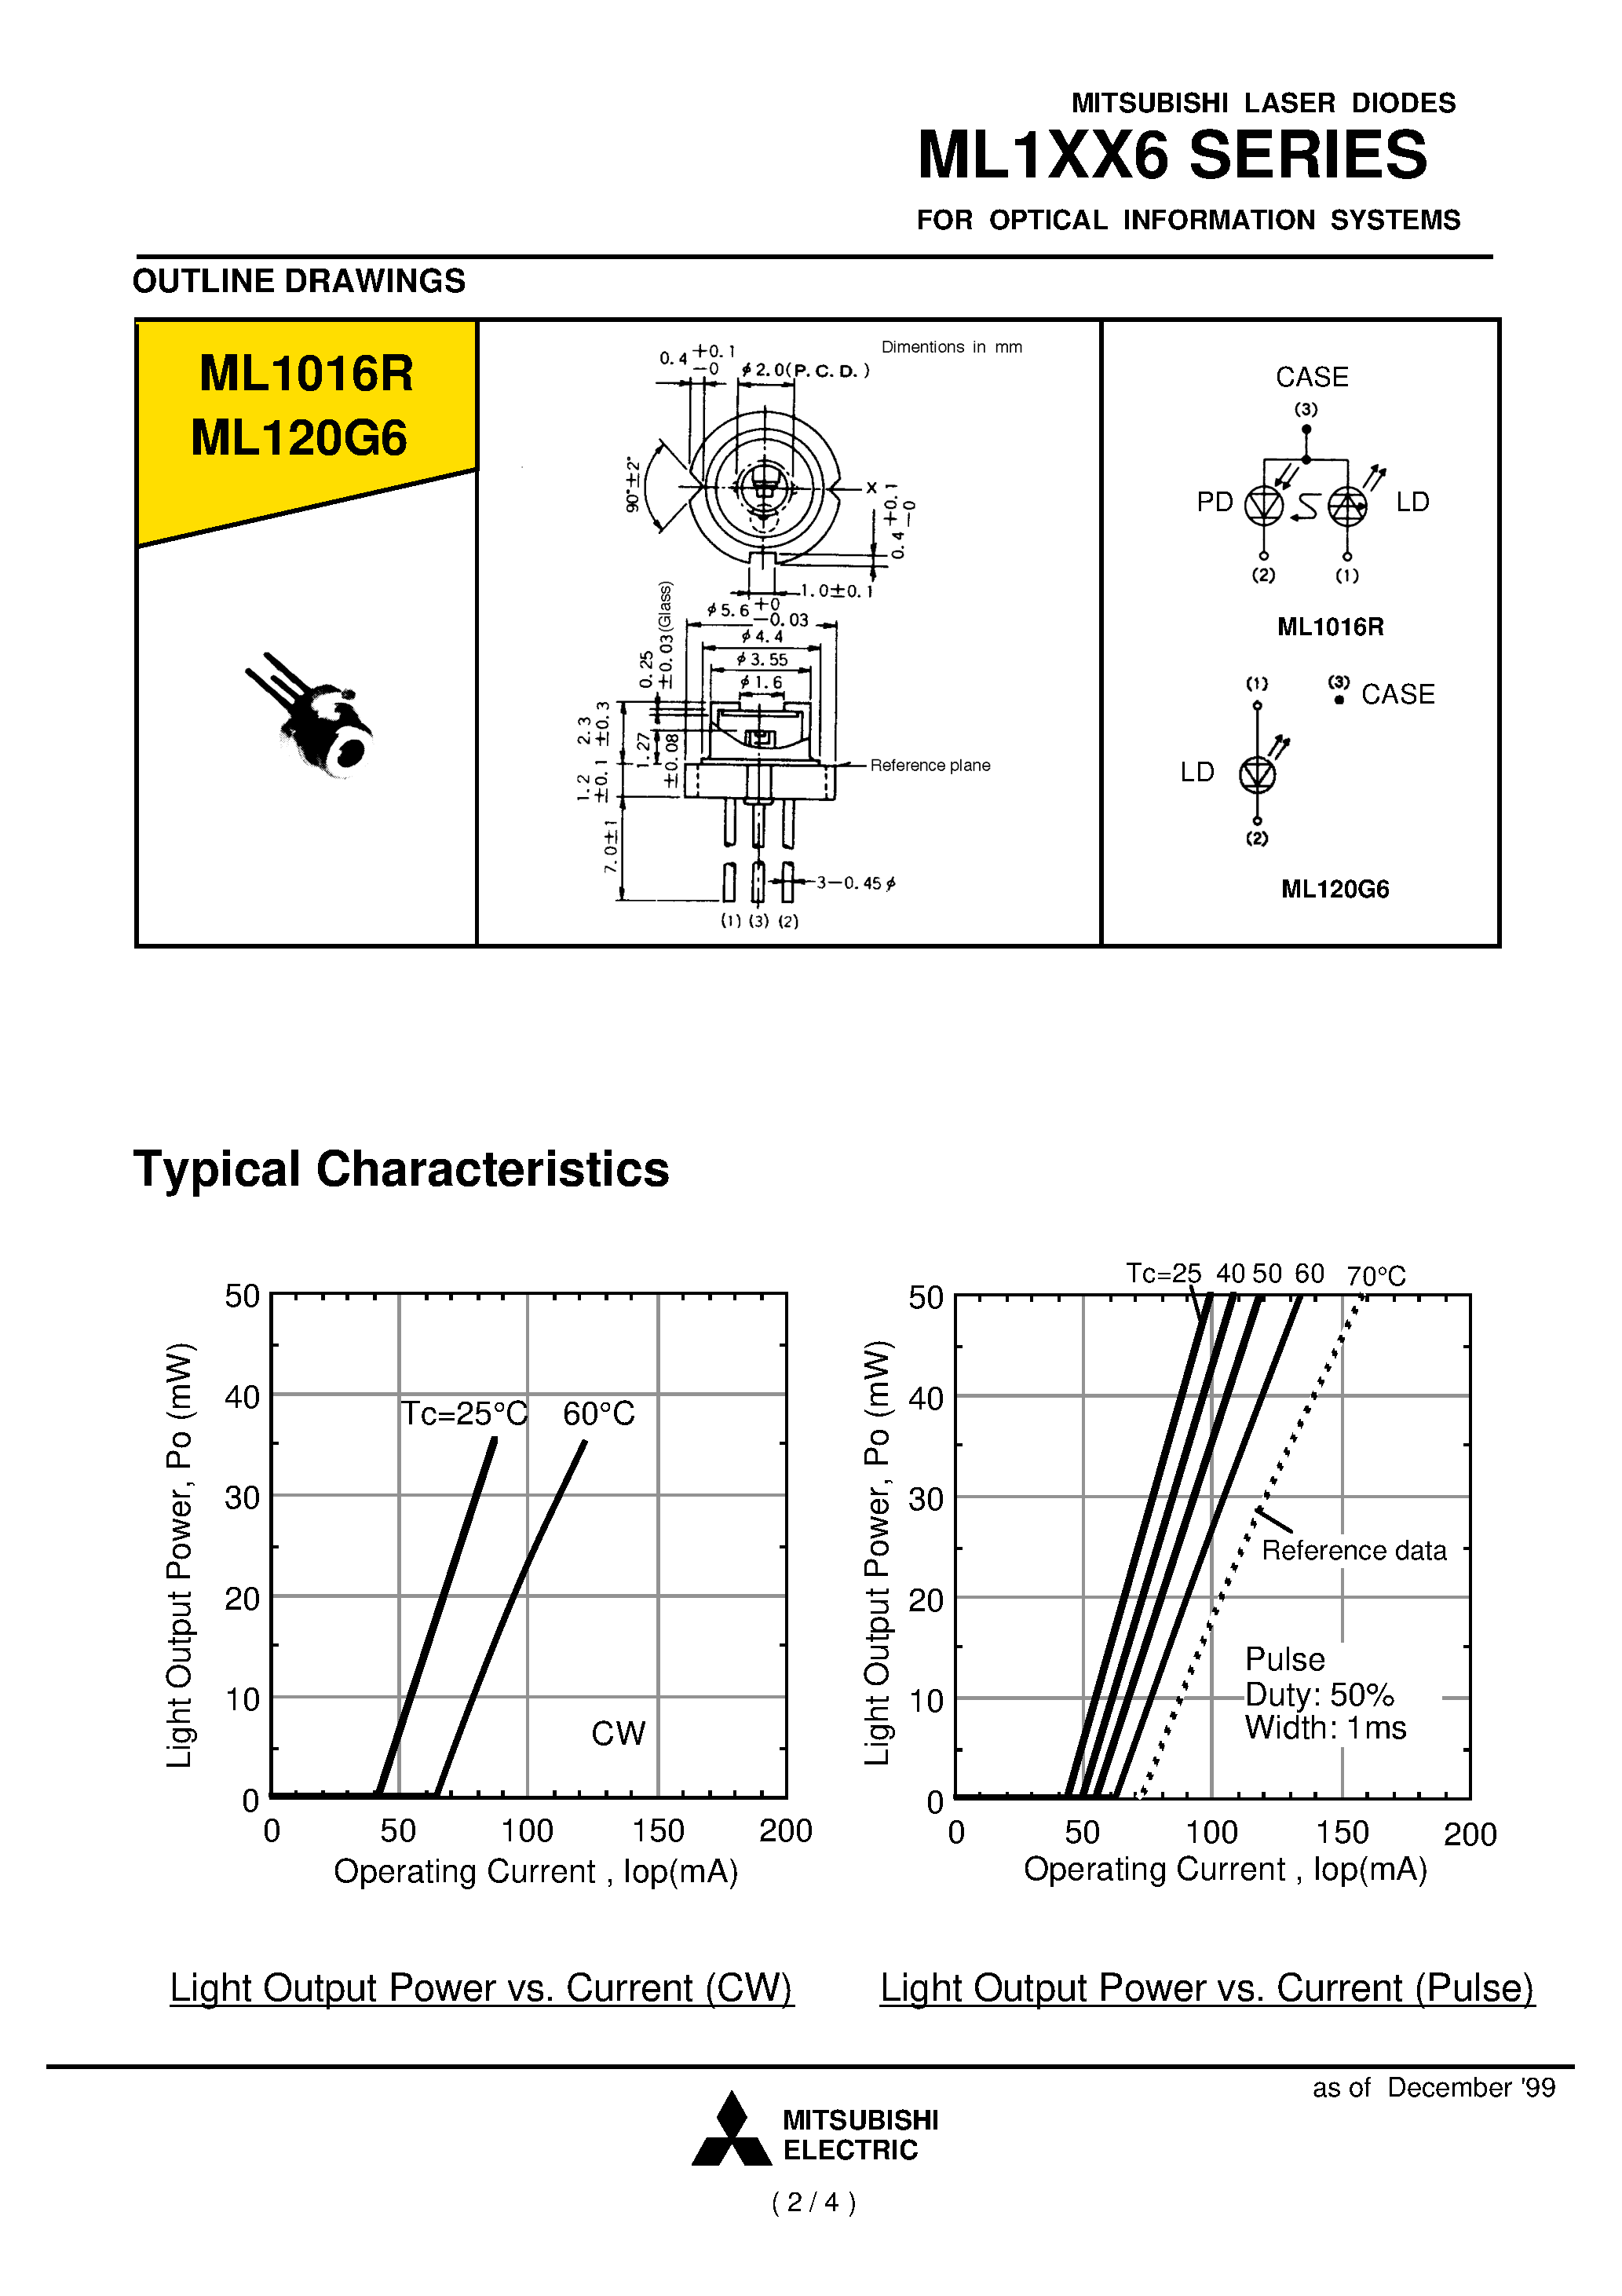 Datasheet ML1XX6 - FOR OPTICAL INFORMATION SYSTEMS page 2